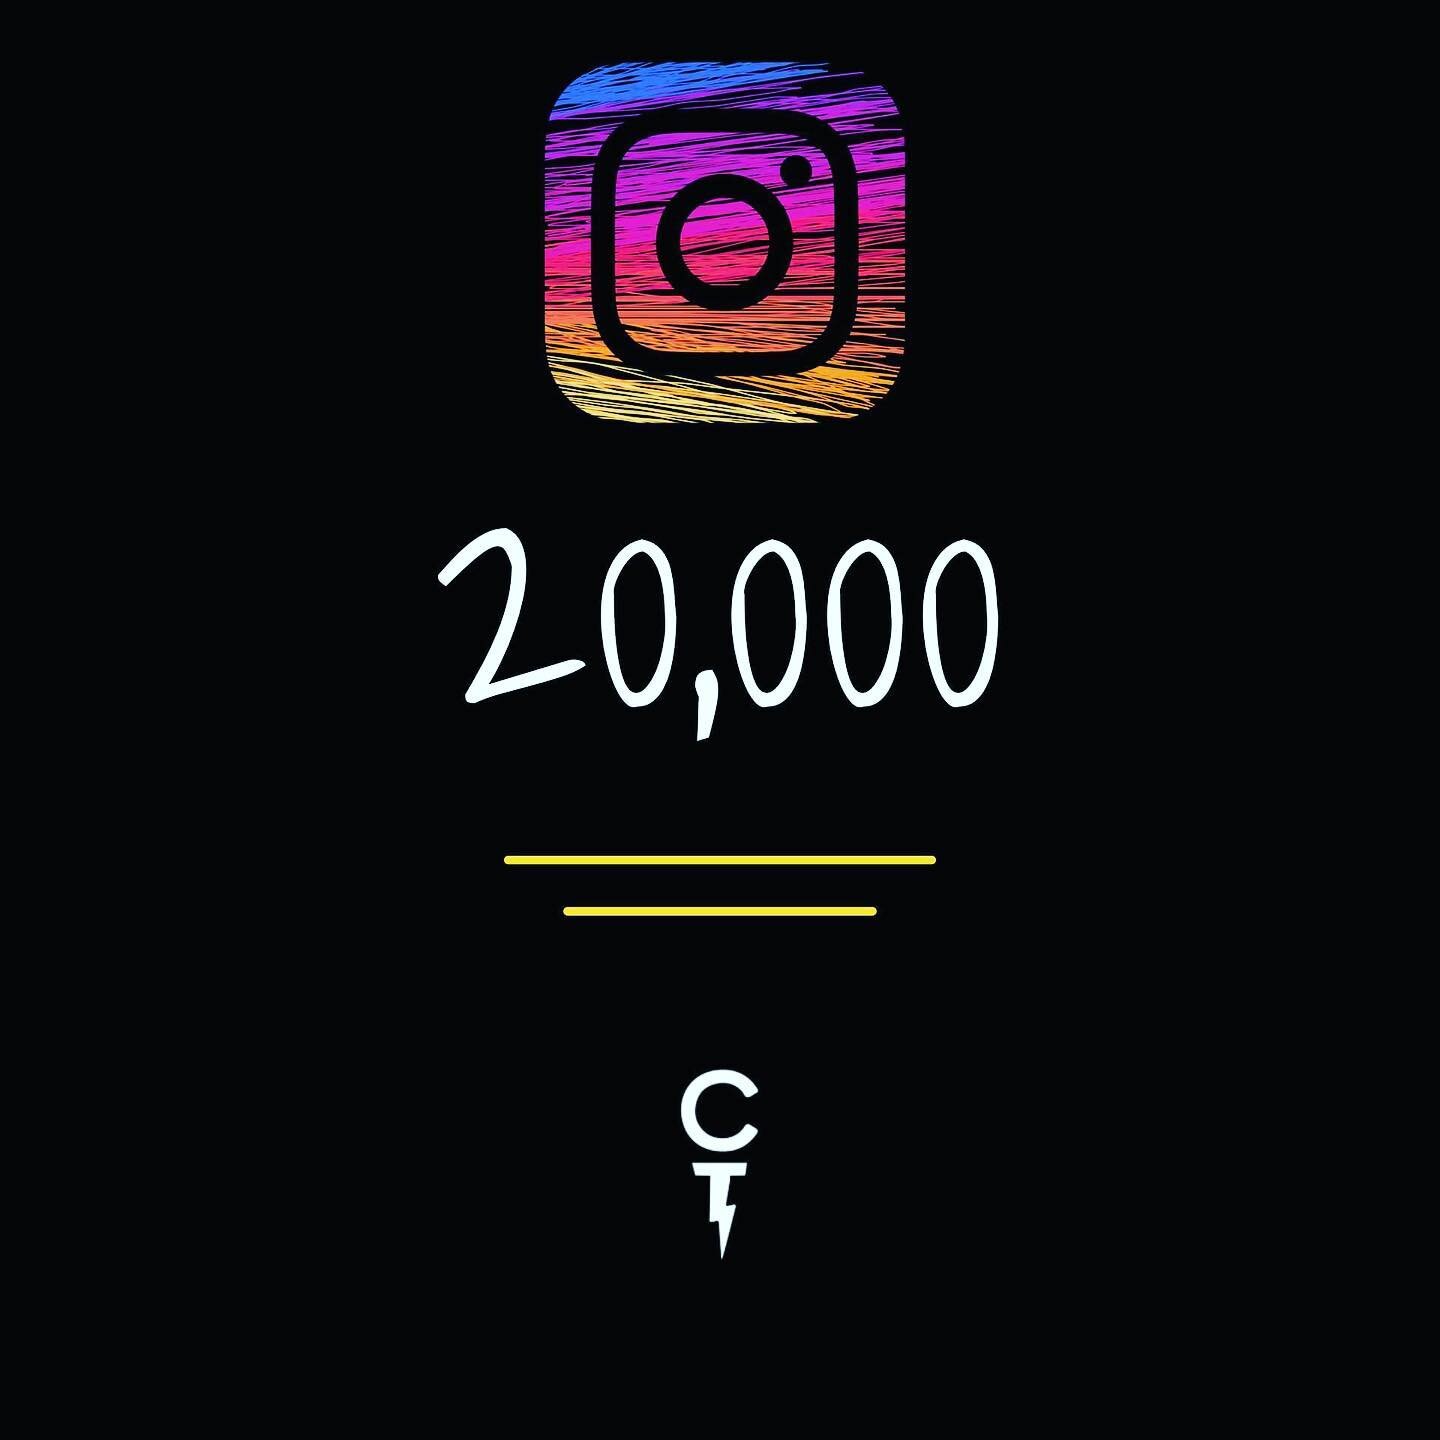 20k followers!! 
Thank you, for your support 🎉

-
-
-
-
-
#music #musica #m&uacute;sica #song #songs #singing #rockband #rockmusic #capitaltheatreband